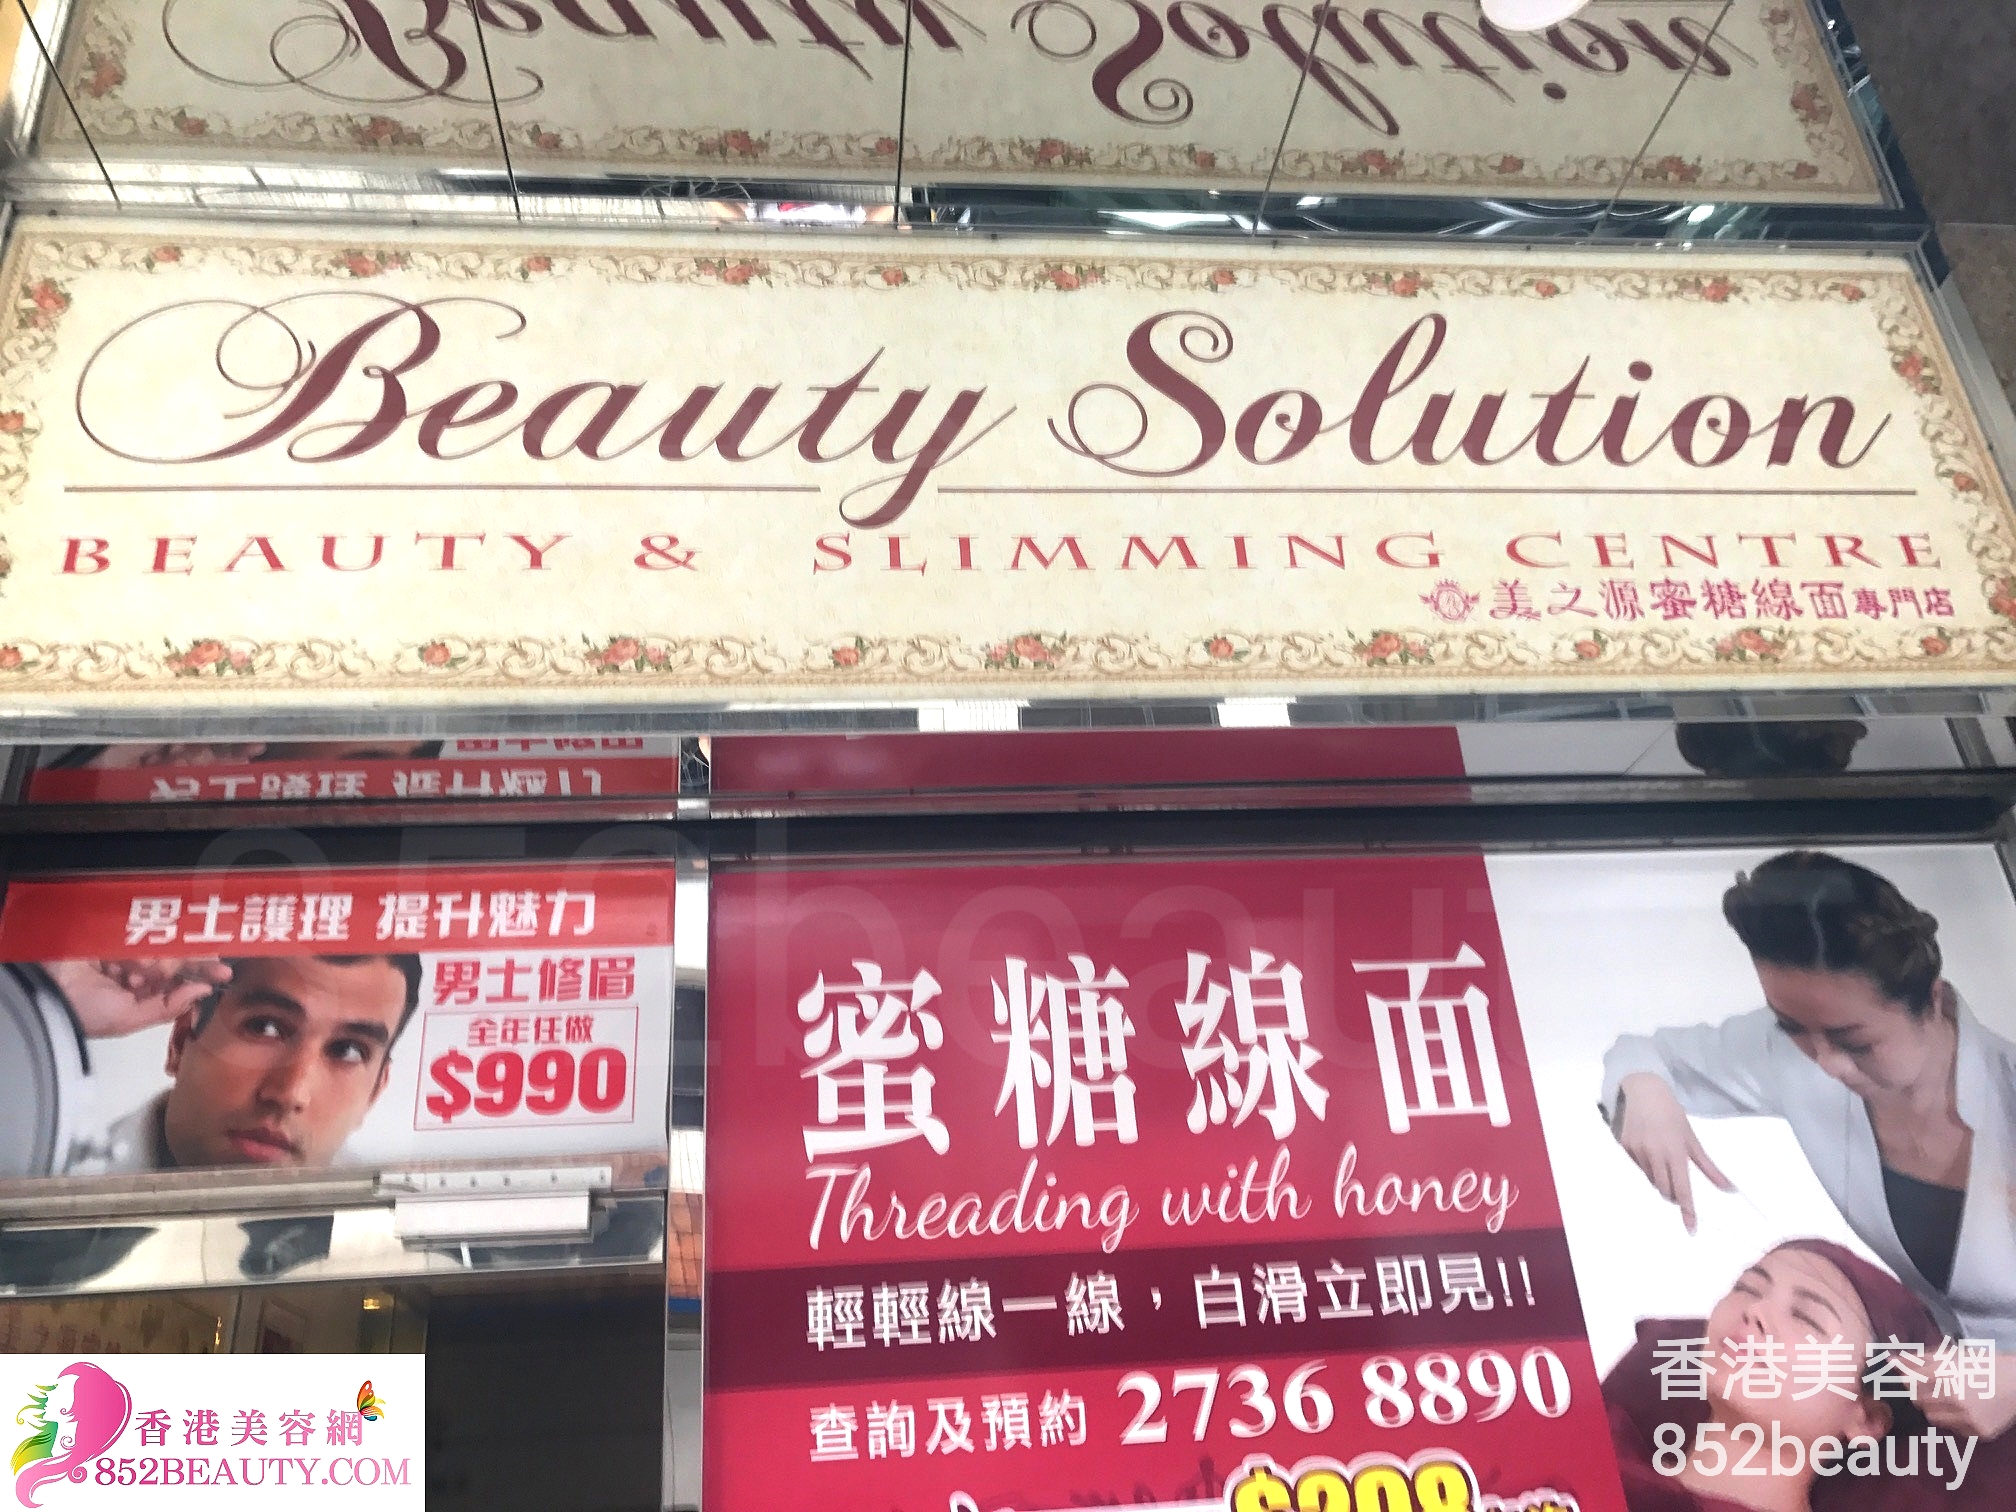 Facial Care: Beauty Solution 美之源蜜糖線面專門店 (佐敦店)